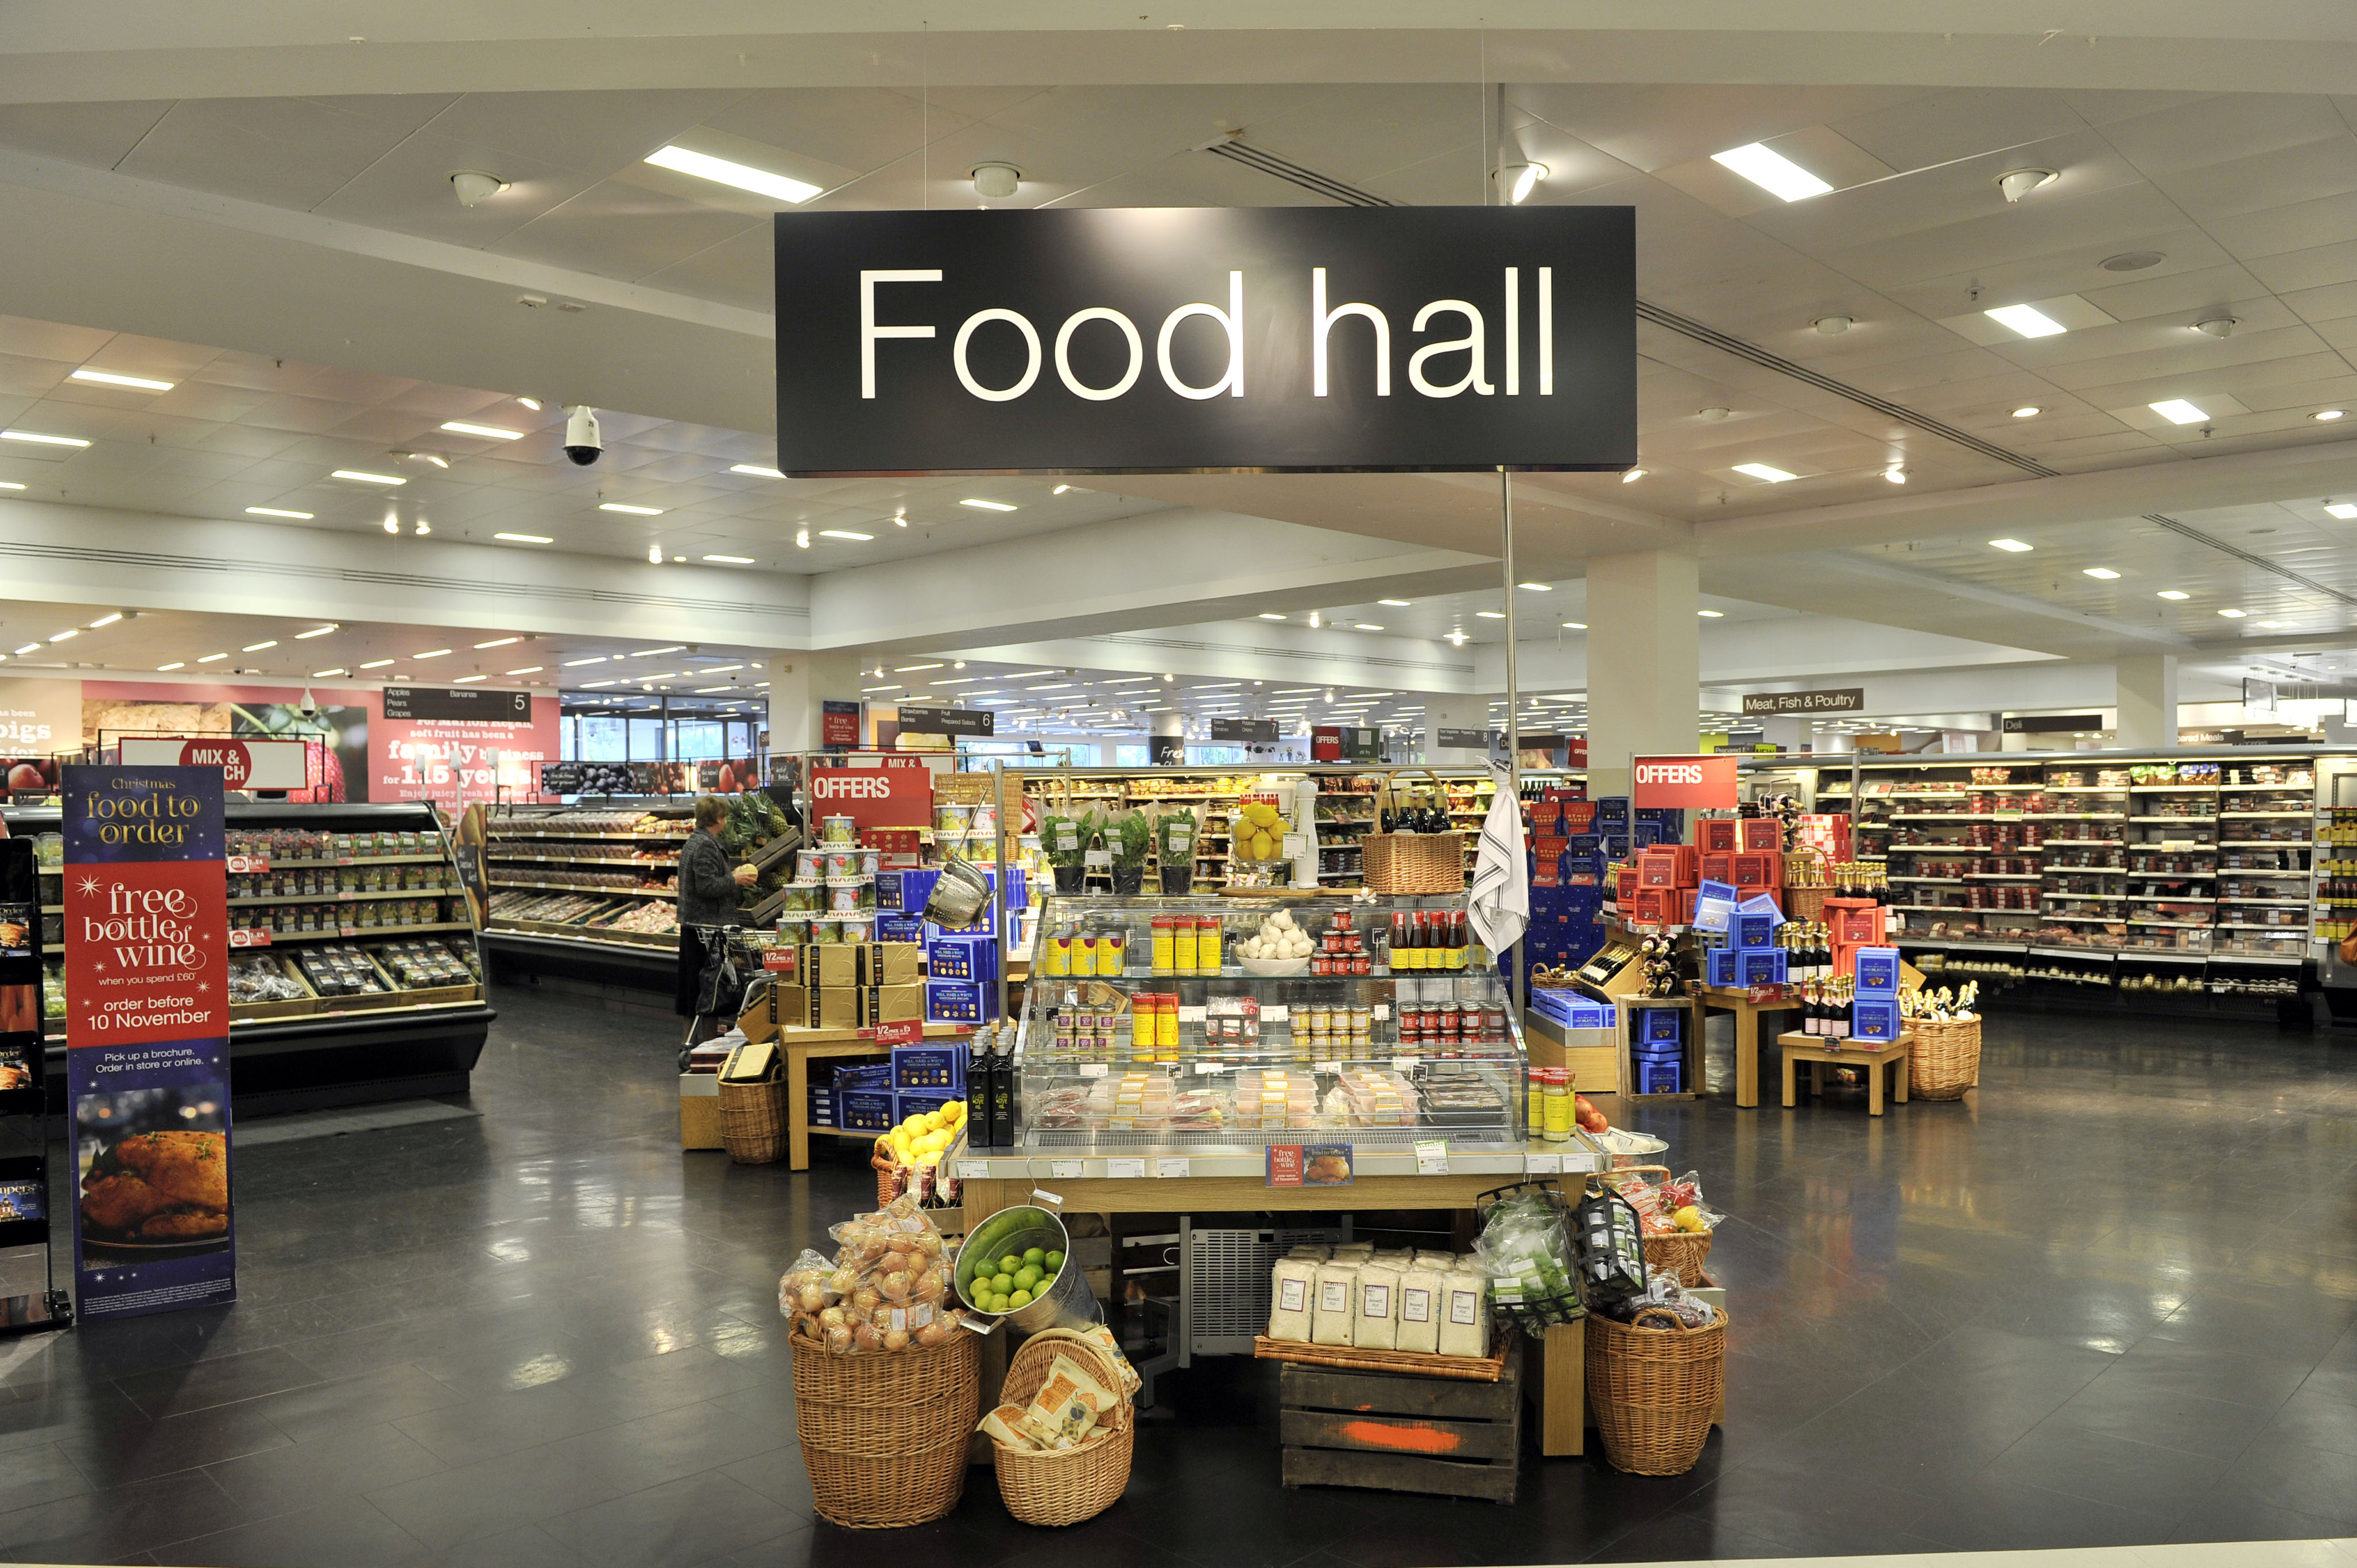 M&S food sales were up +17% over the key Christmas week